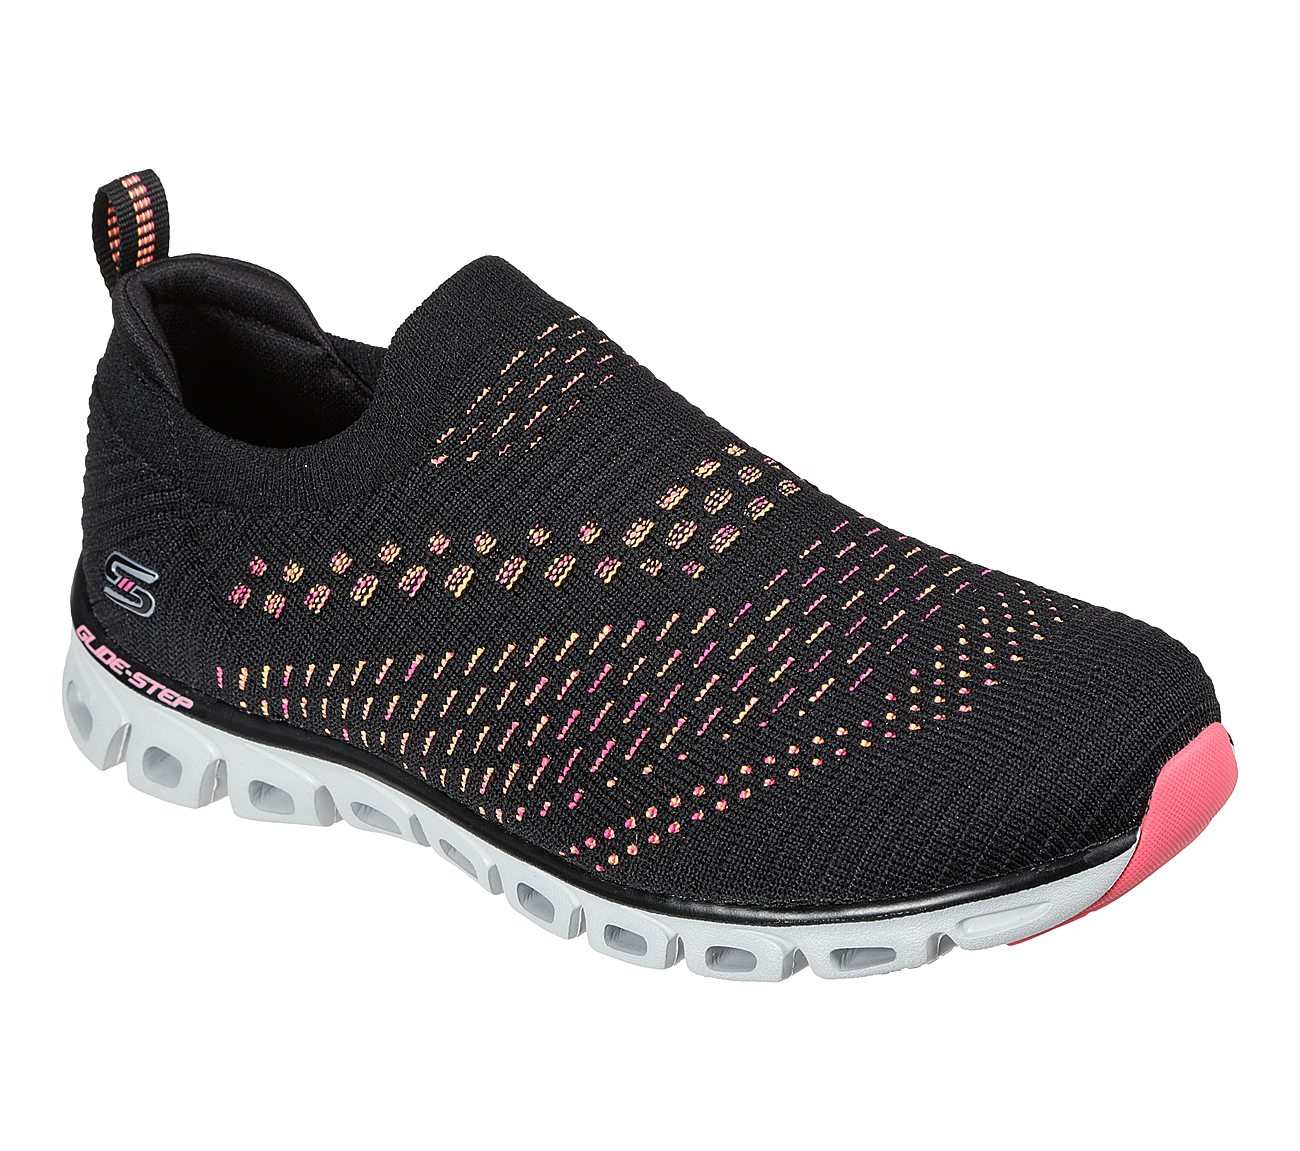 GLIDE-STEP - OH SO SOFT, BLACK/HOT PINK Footwear Right View